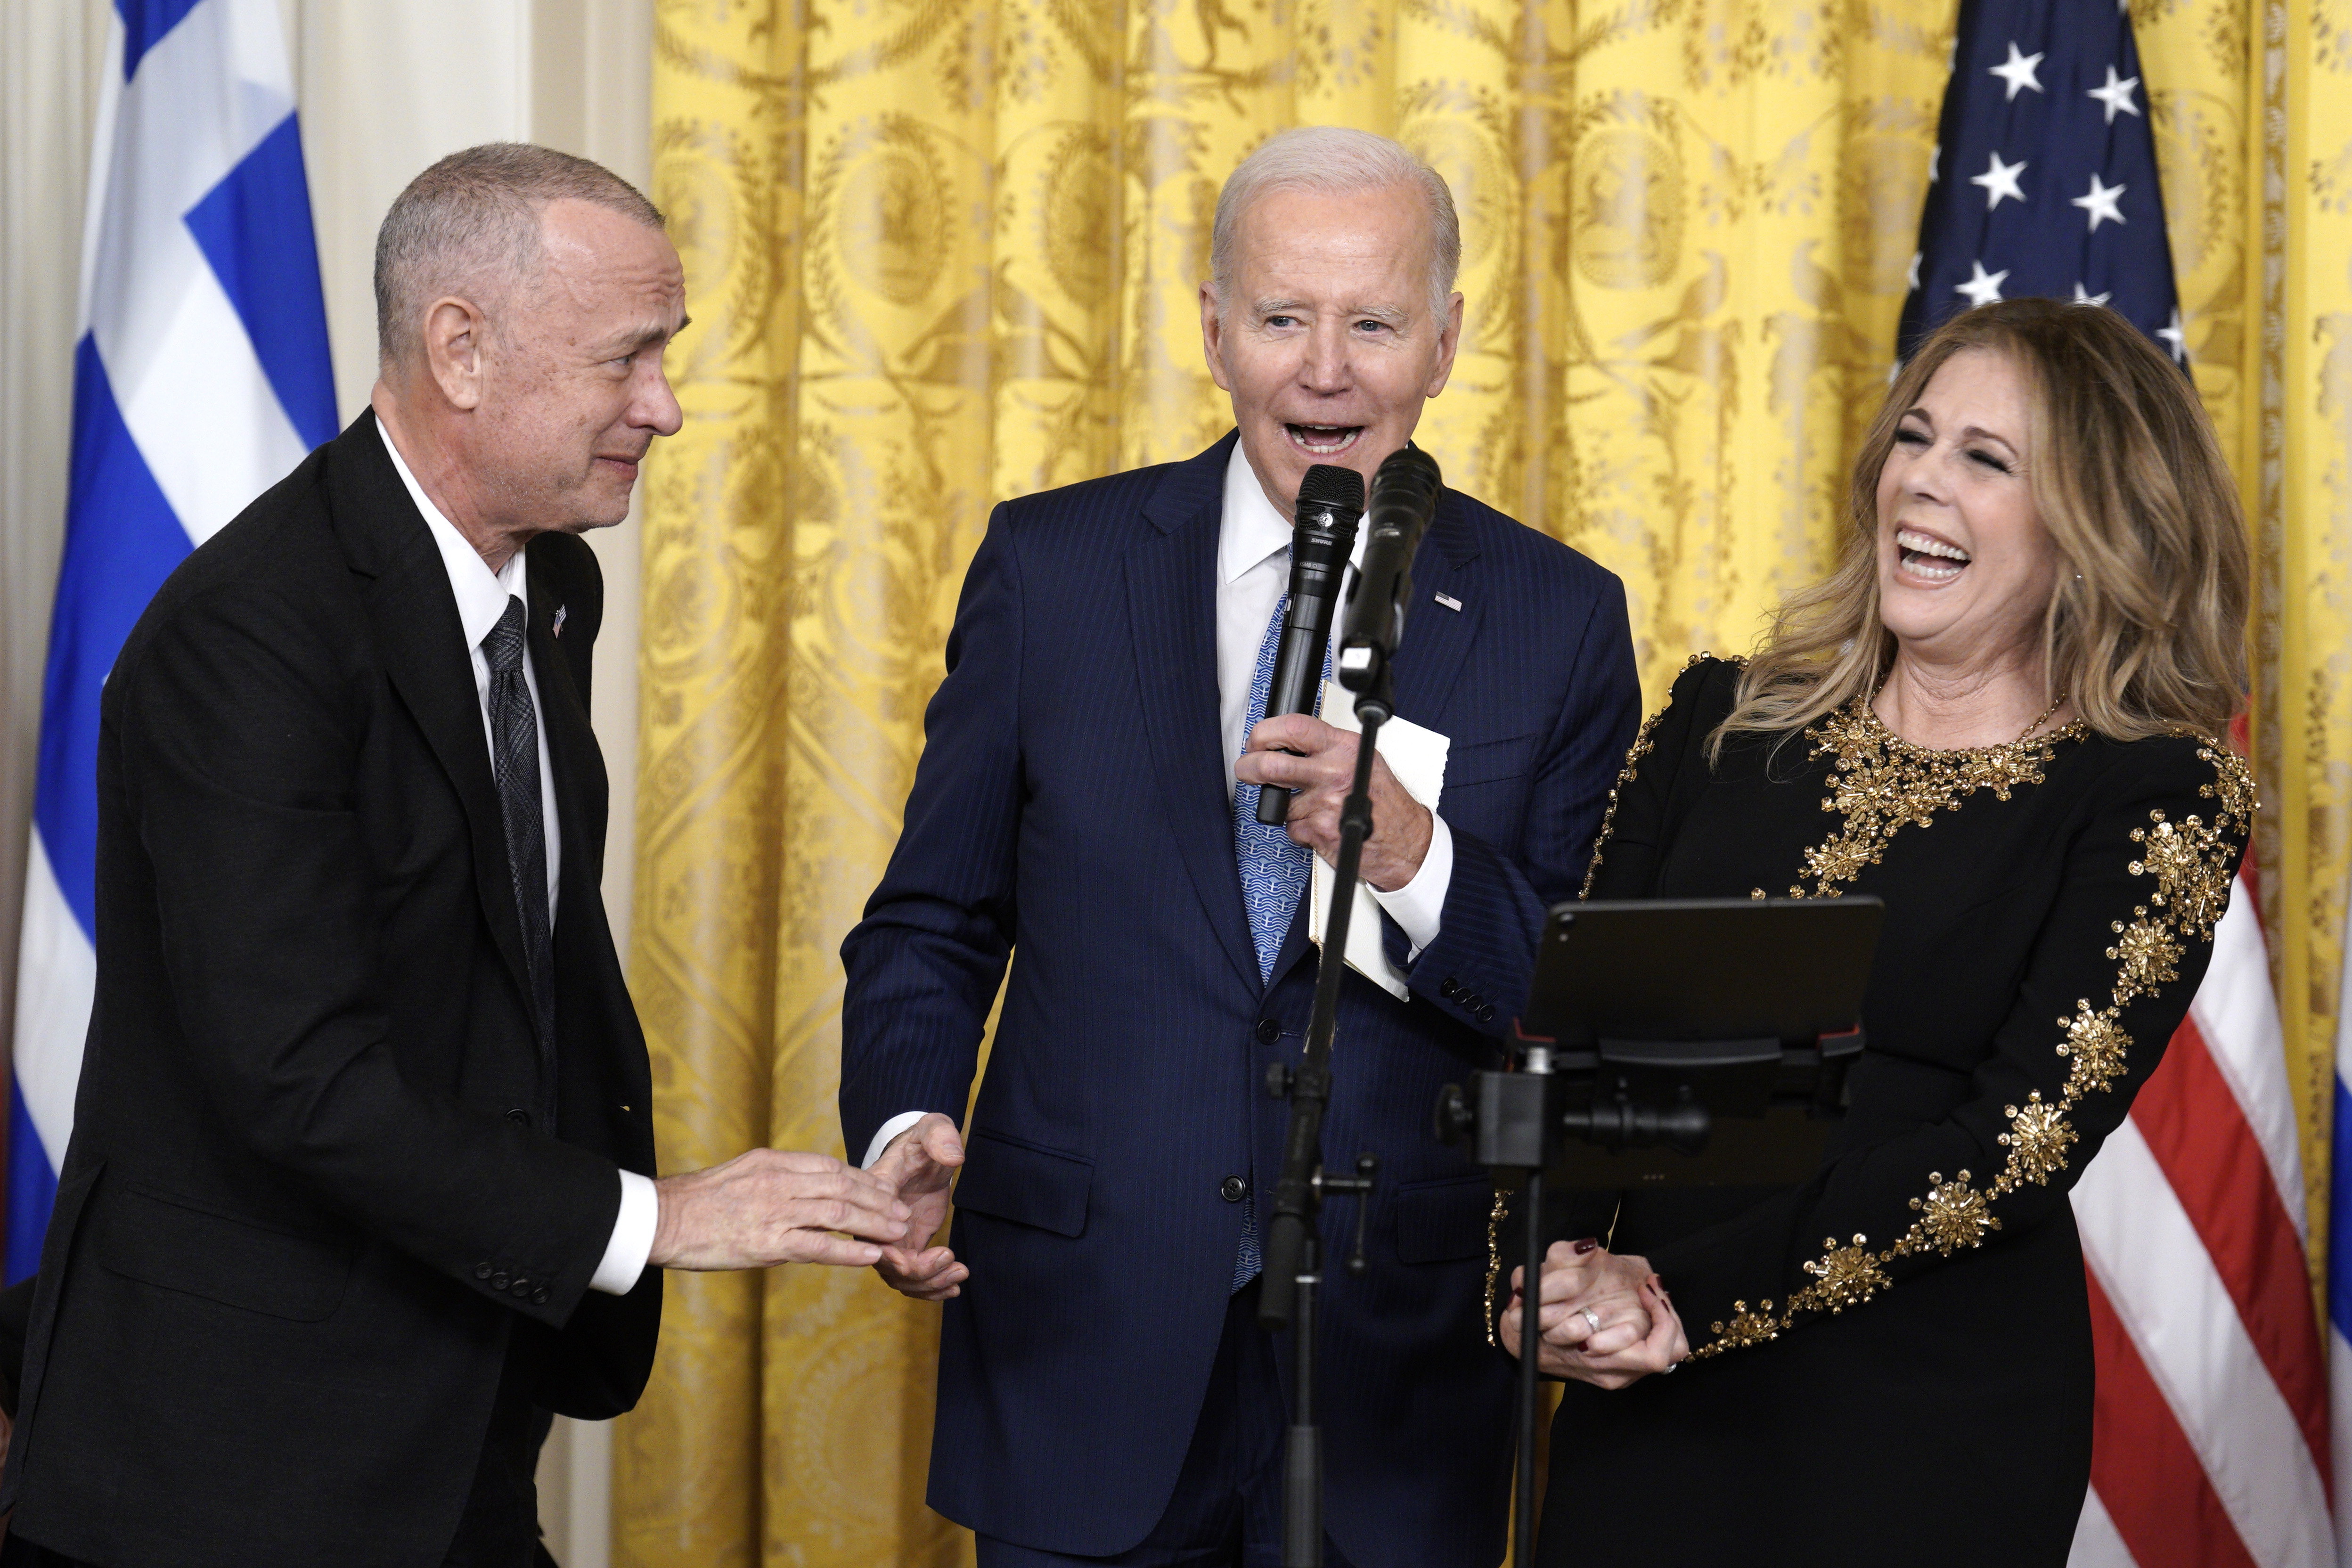 biden-celebrates-greek-independence-day-at-the-white-house4